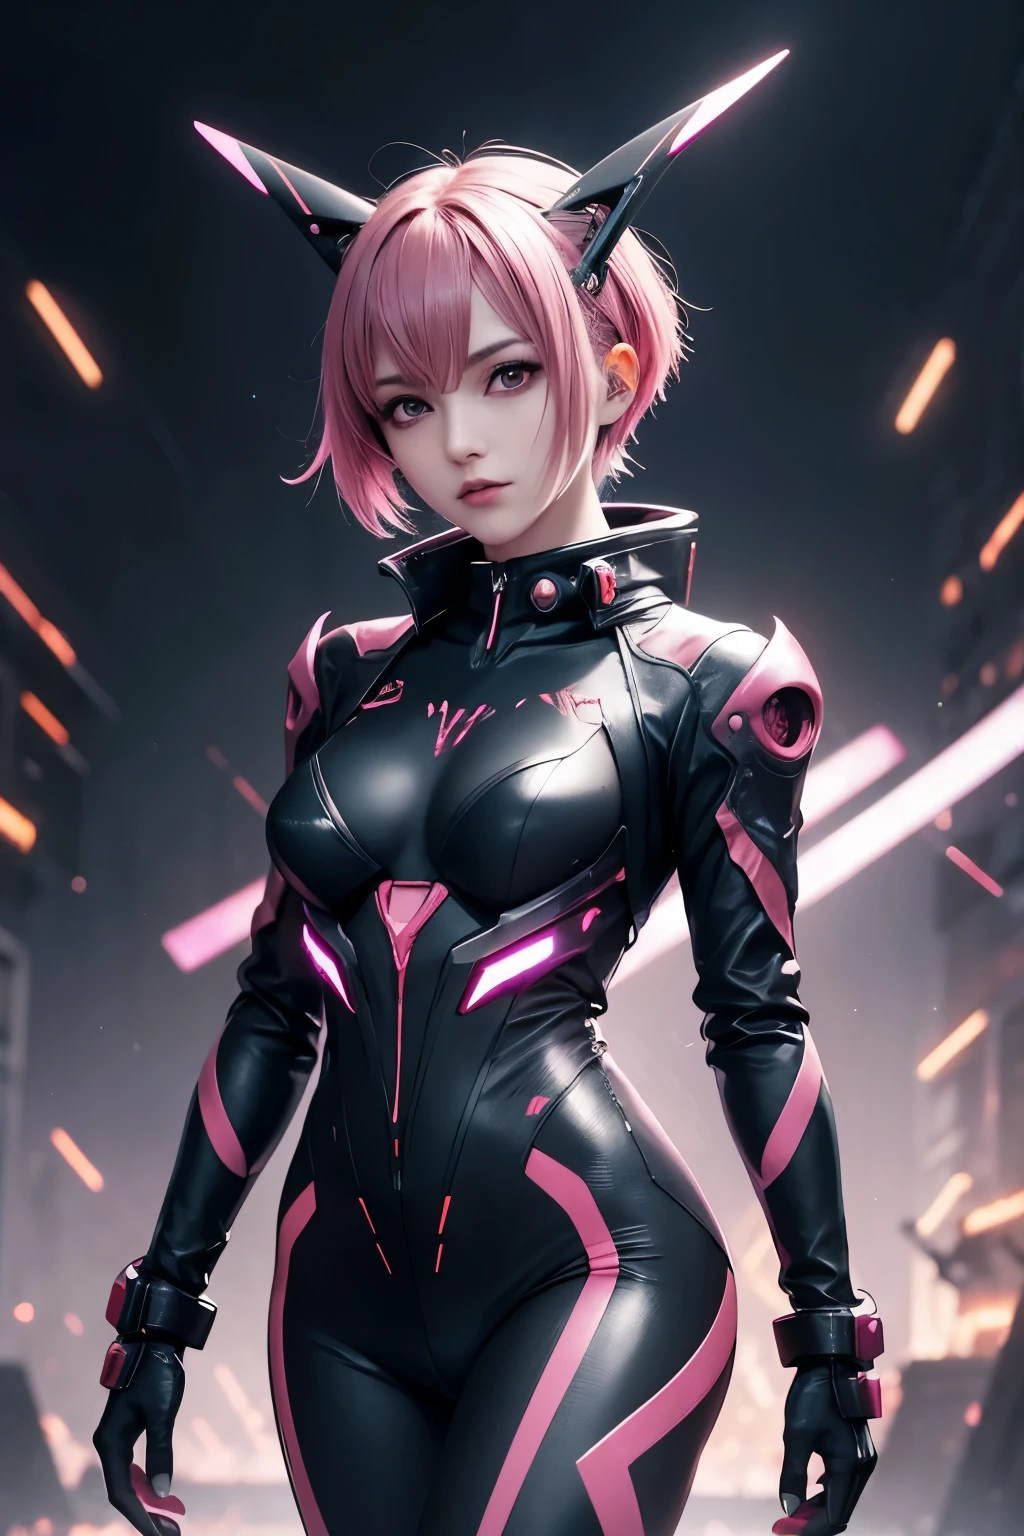 Waist up hot cyberpunk witch (masterpiece) with short pink hair, best quality, wearing cyberpunk rabbit ears & a tight plugsuit sci-fi outfit (Evangelion style), short jacket, sharp focus, moving pose, cybersamurai, glowing